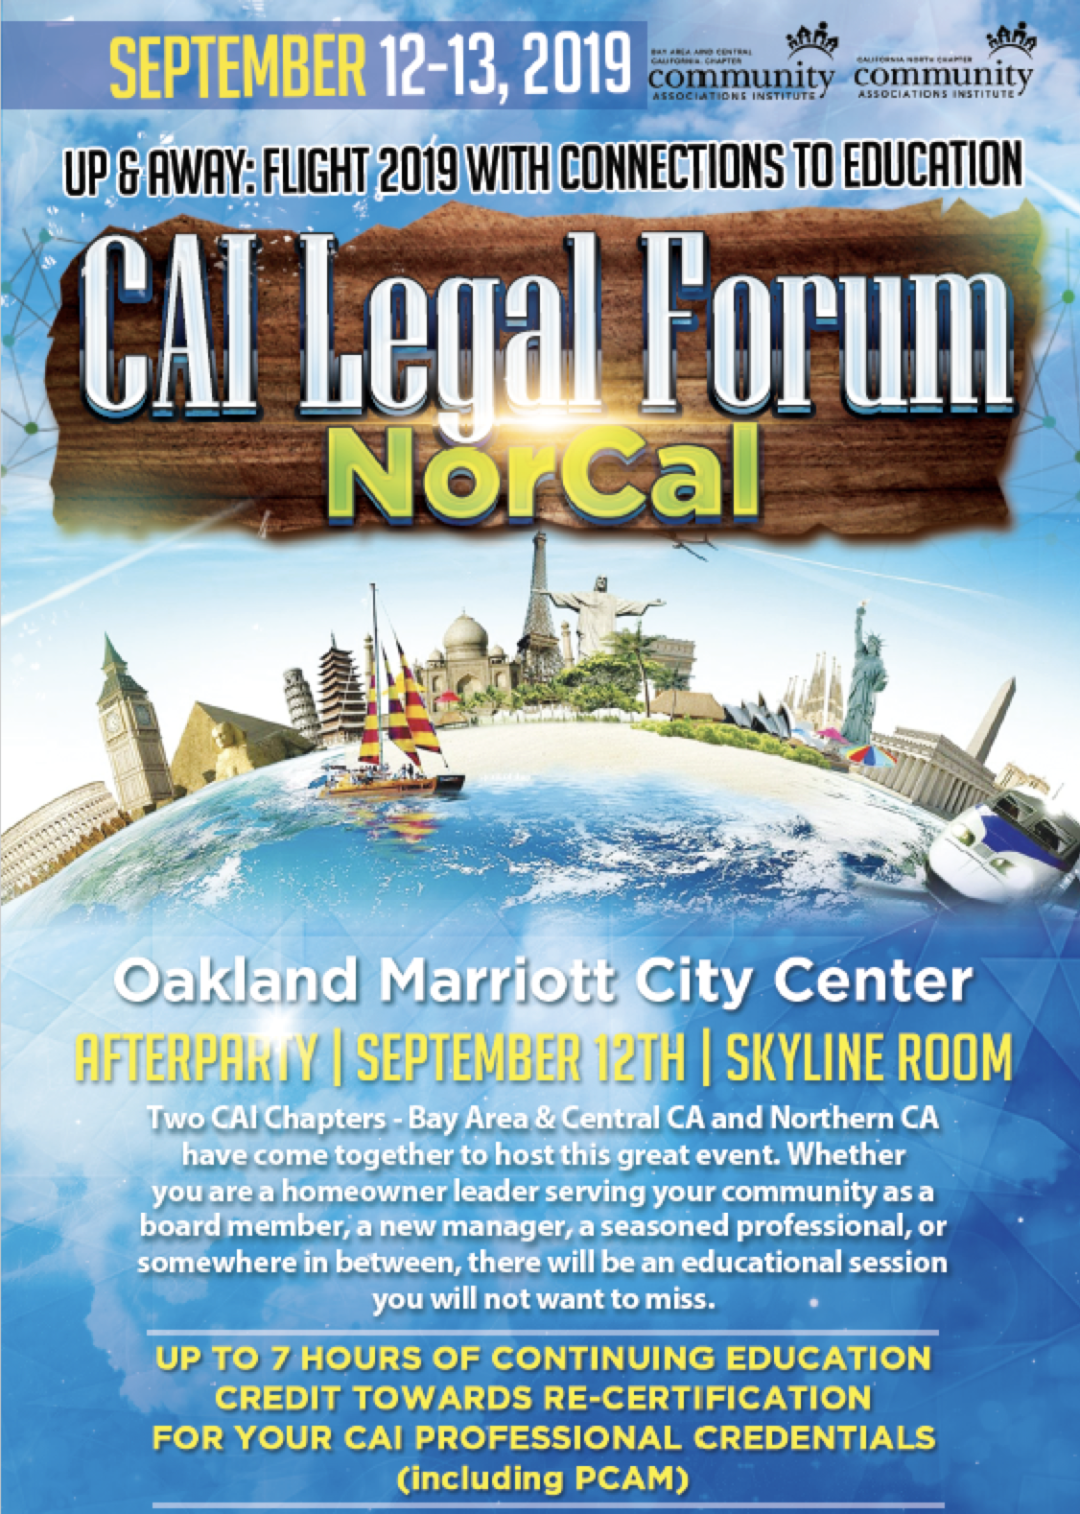 Statcomm Will Be Exhibiting At The CAI Legal Forum: NorCAL